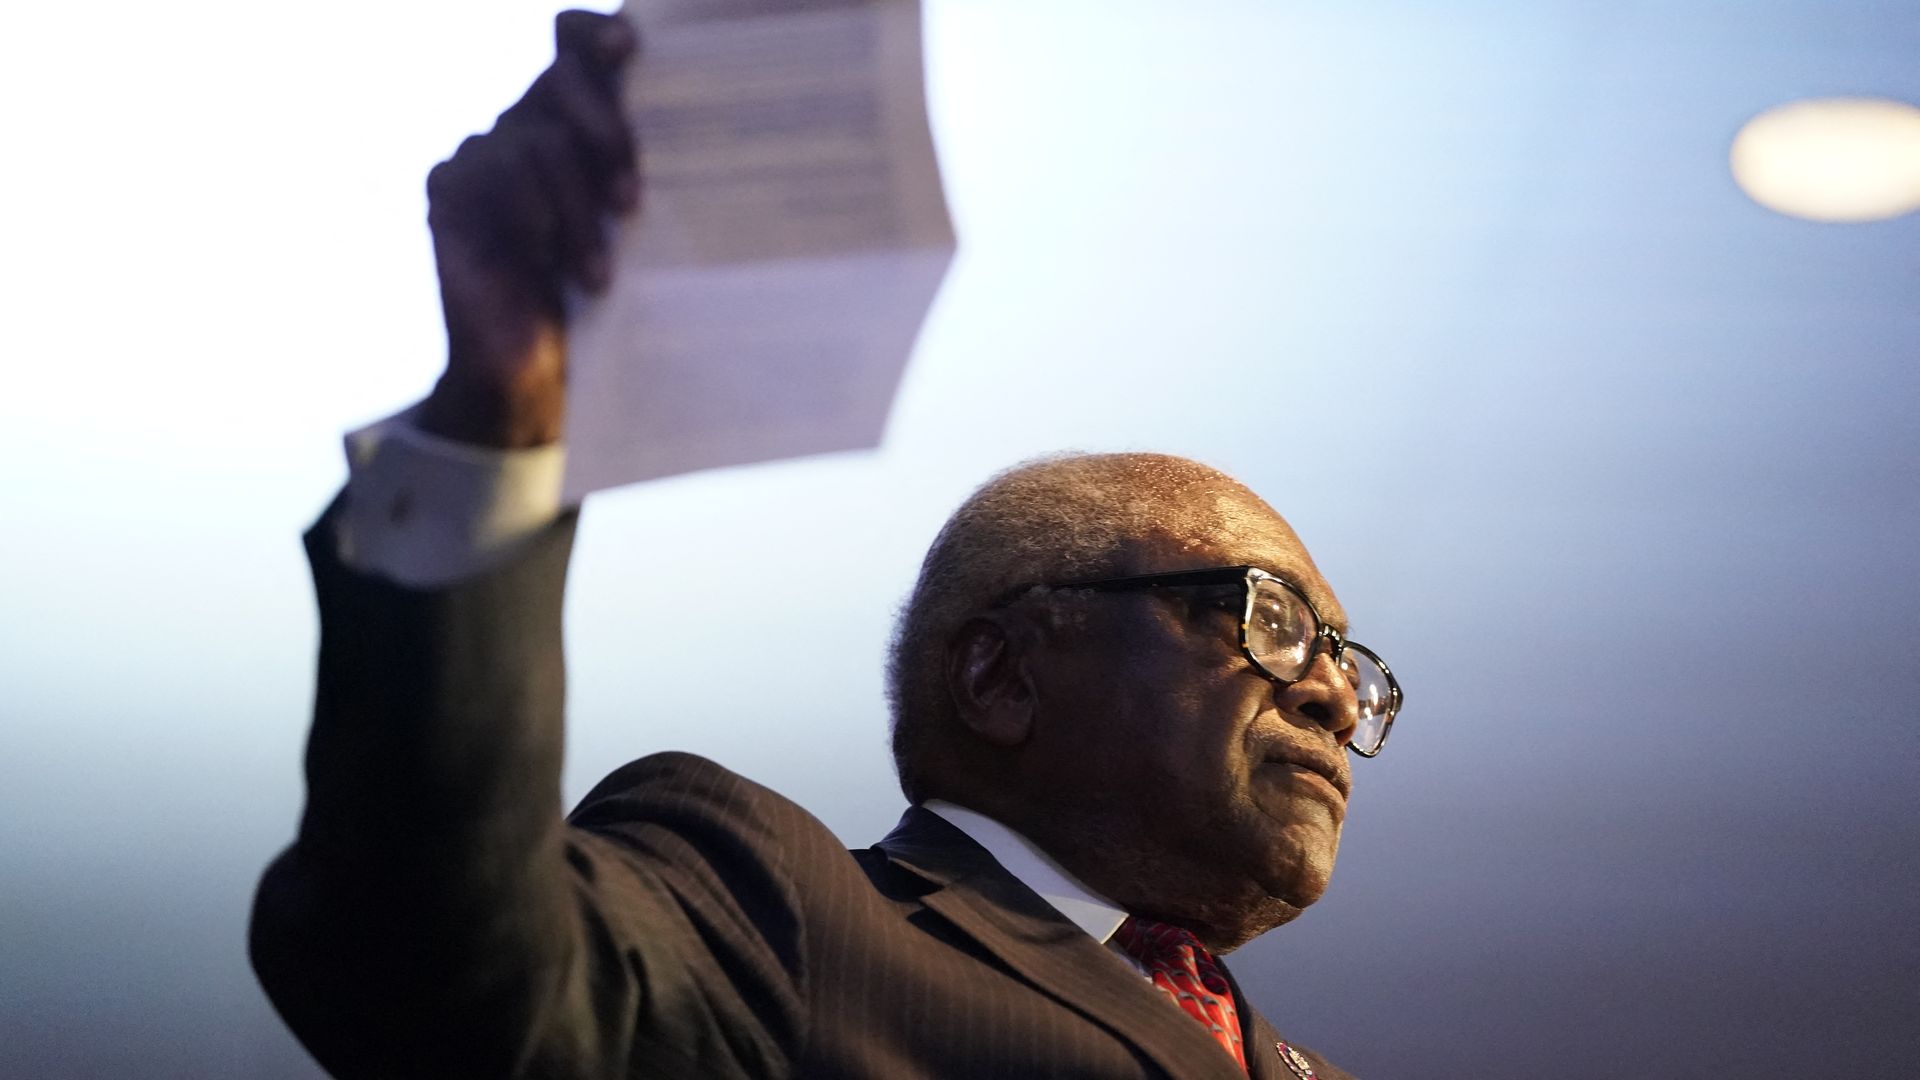 Clyburn holds a paper in his hand. The photo is taken from below.